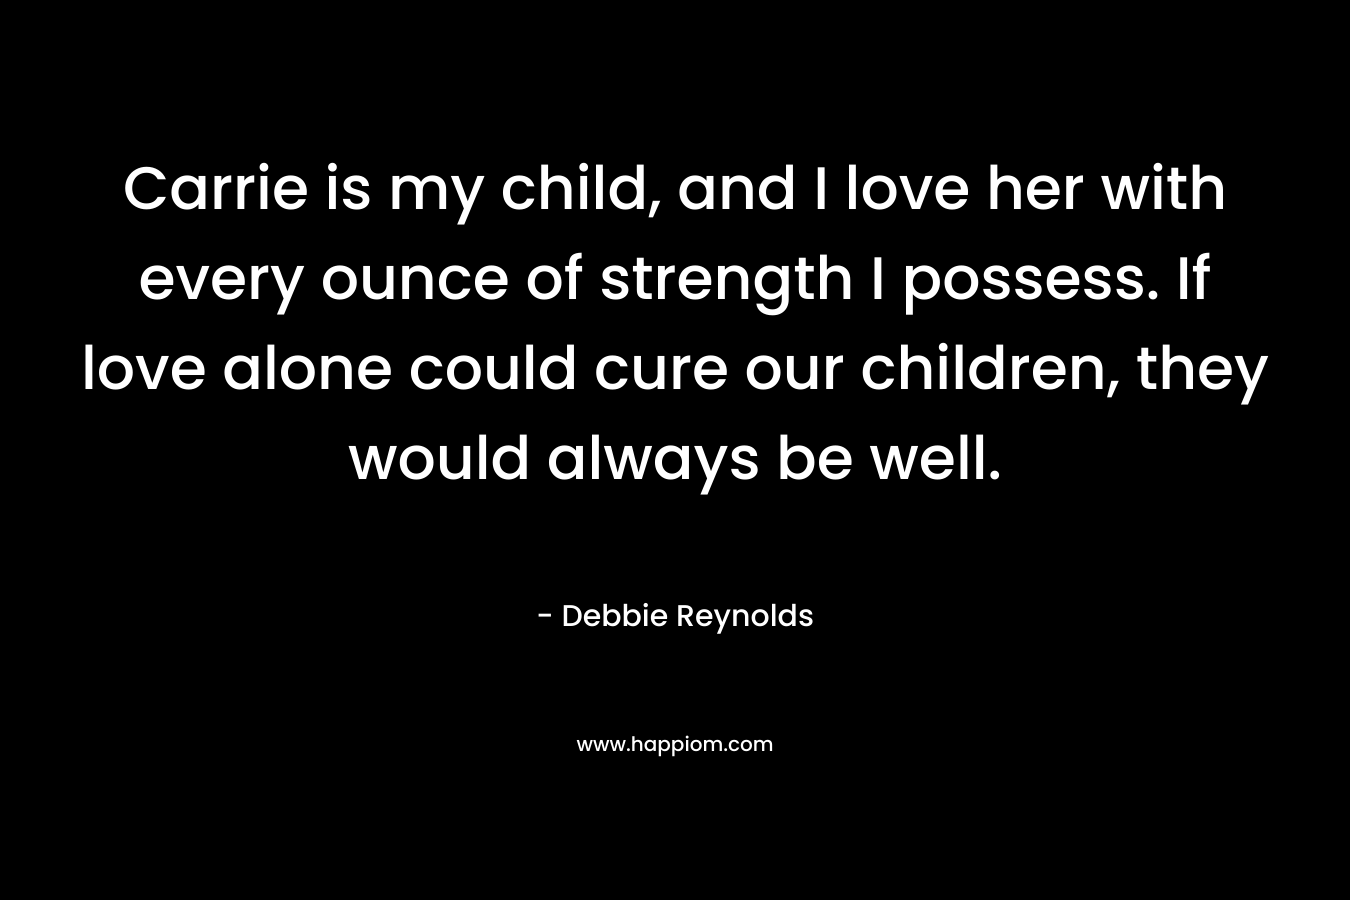 Carrie is my child, and I love her with every ounce of strength I possess. If love alone could cure our children, they would always be well. – Debbie Reynolds